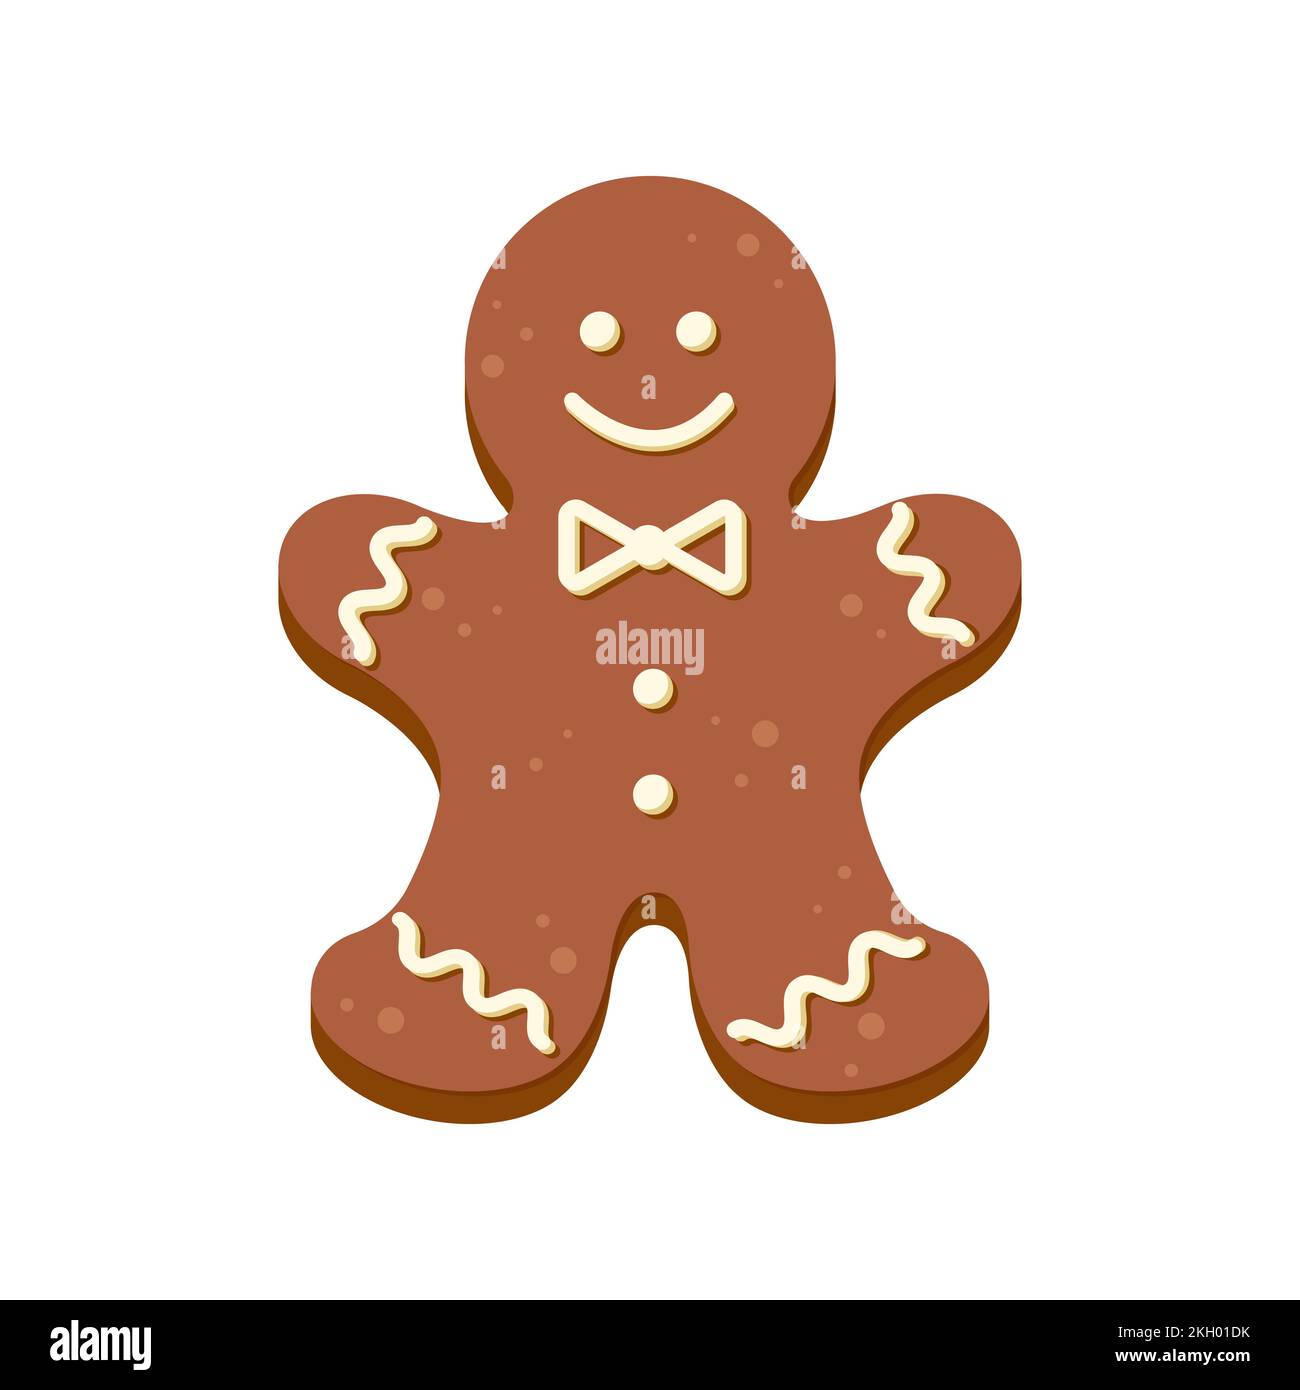 Christmas Cookie Gingerbread Man Vector Illustration In Flat Cartoon Style Isolated On White